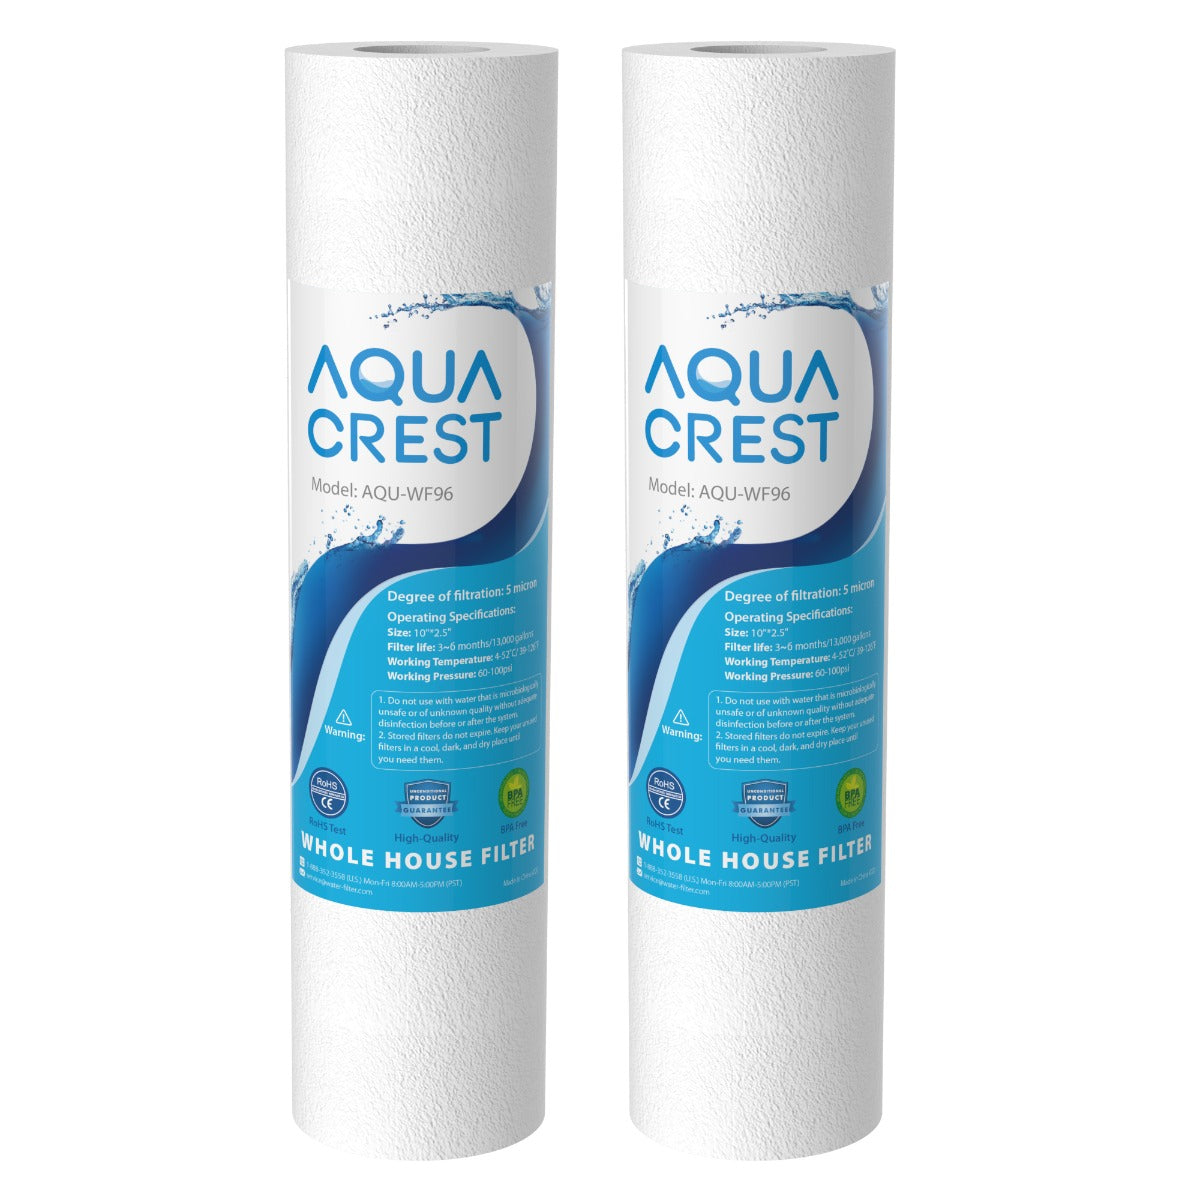 AQUACREST 5 Micron 10" x 2.5" Whole House Sediment Water Filter, Replacement for Any 10 inch RO Unit, Culligan P5, Aqua-Pure AP110, Dupont WFPFC5002